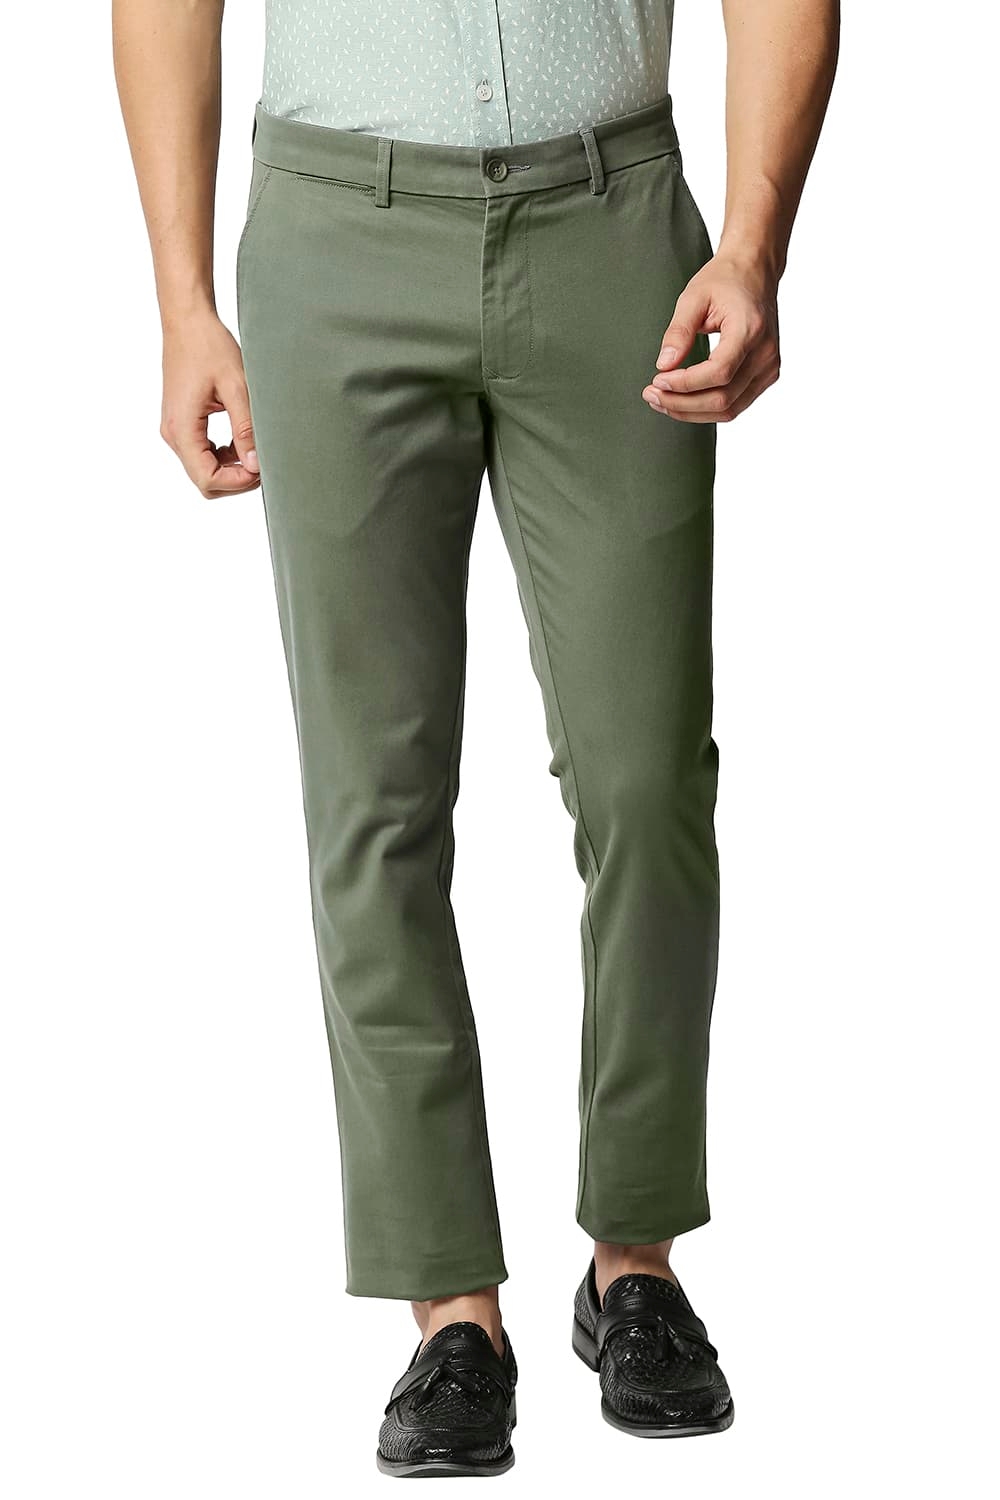 BASICS CASUAL PLAIN GREEN COTTON STRETCH TAPERED TROUSERS 